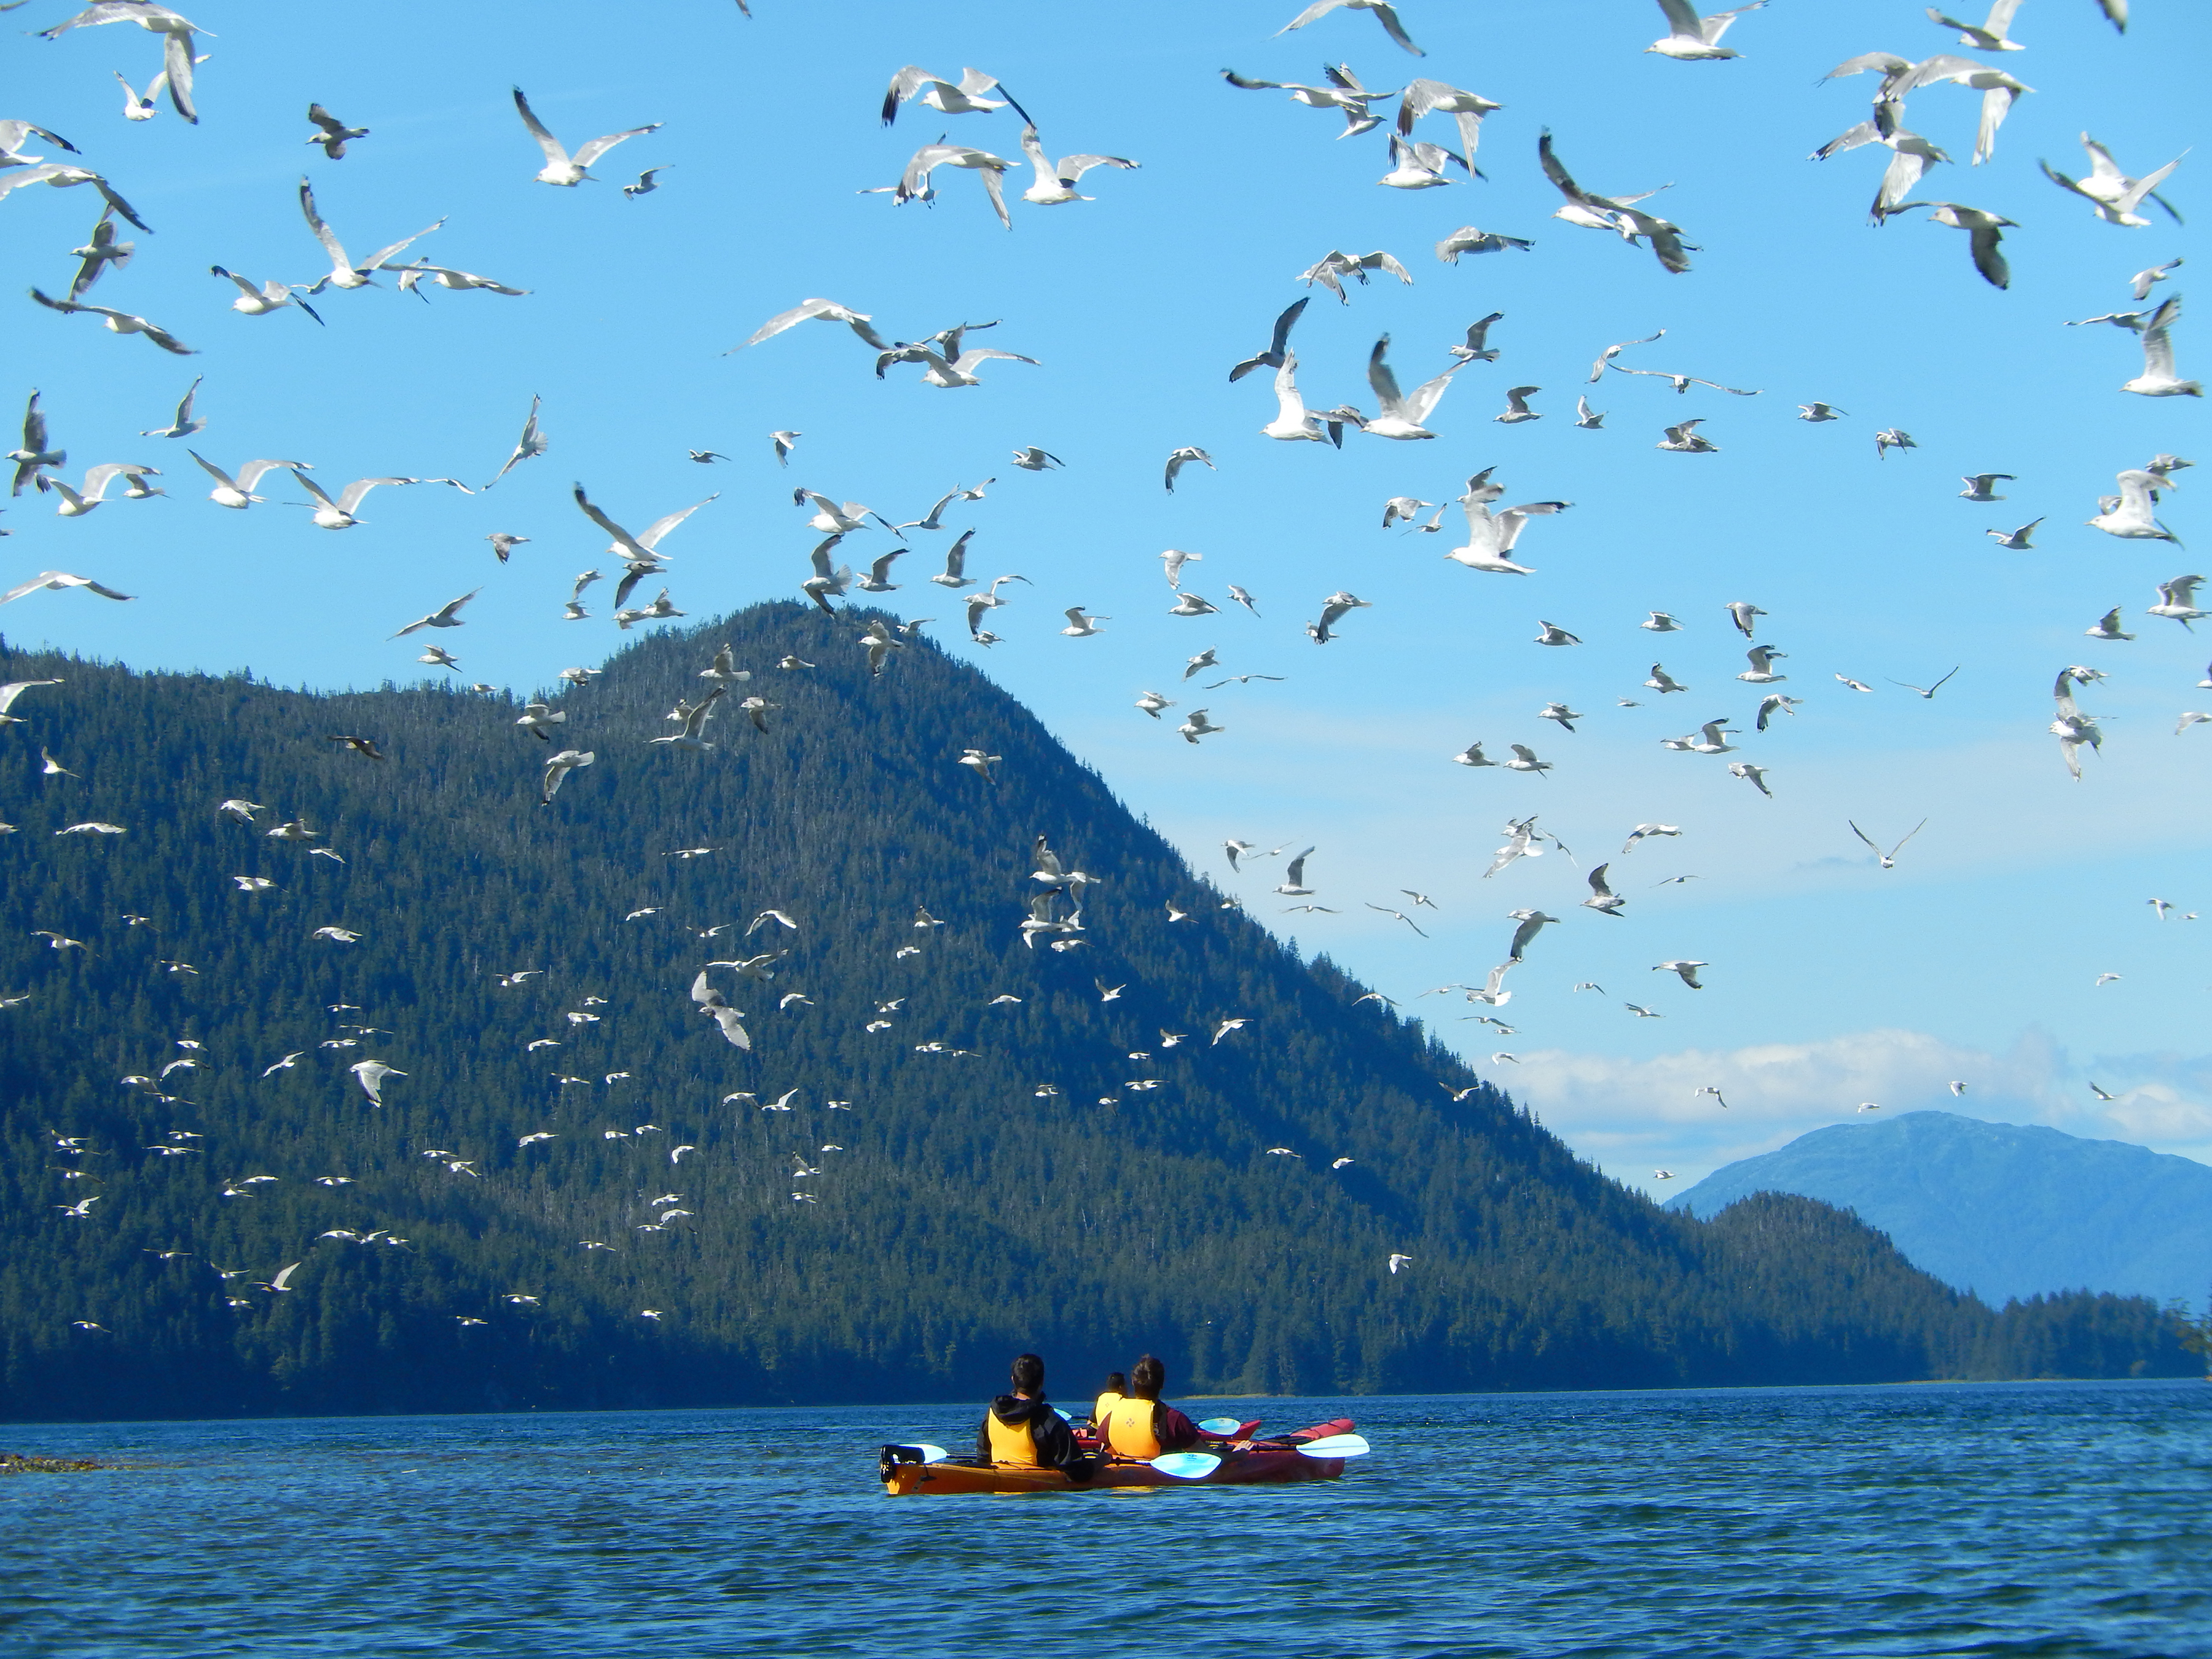 Birds flying over kayakers 